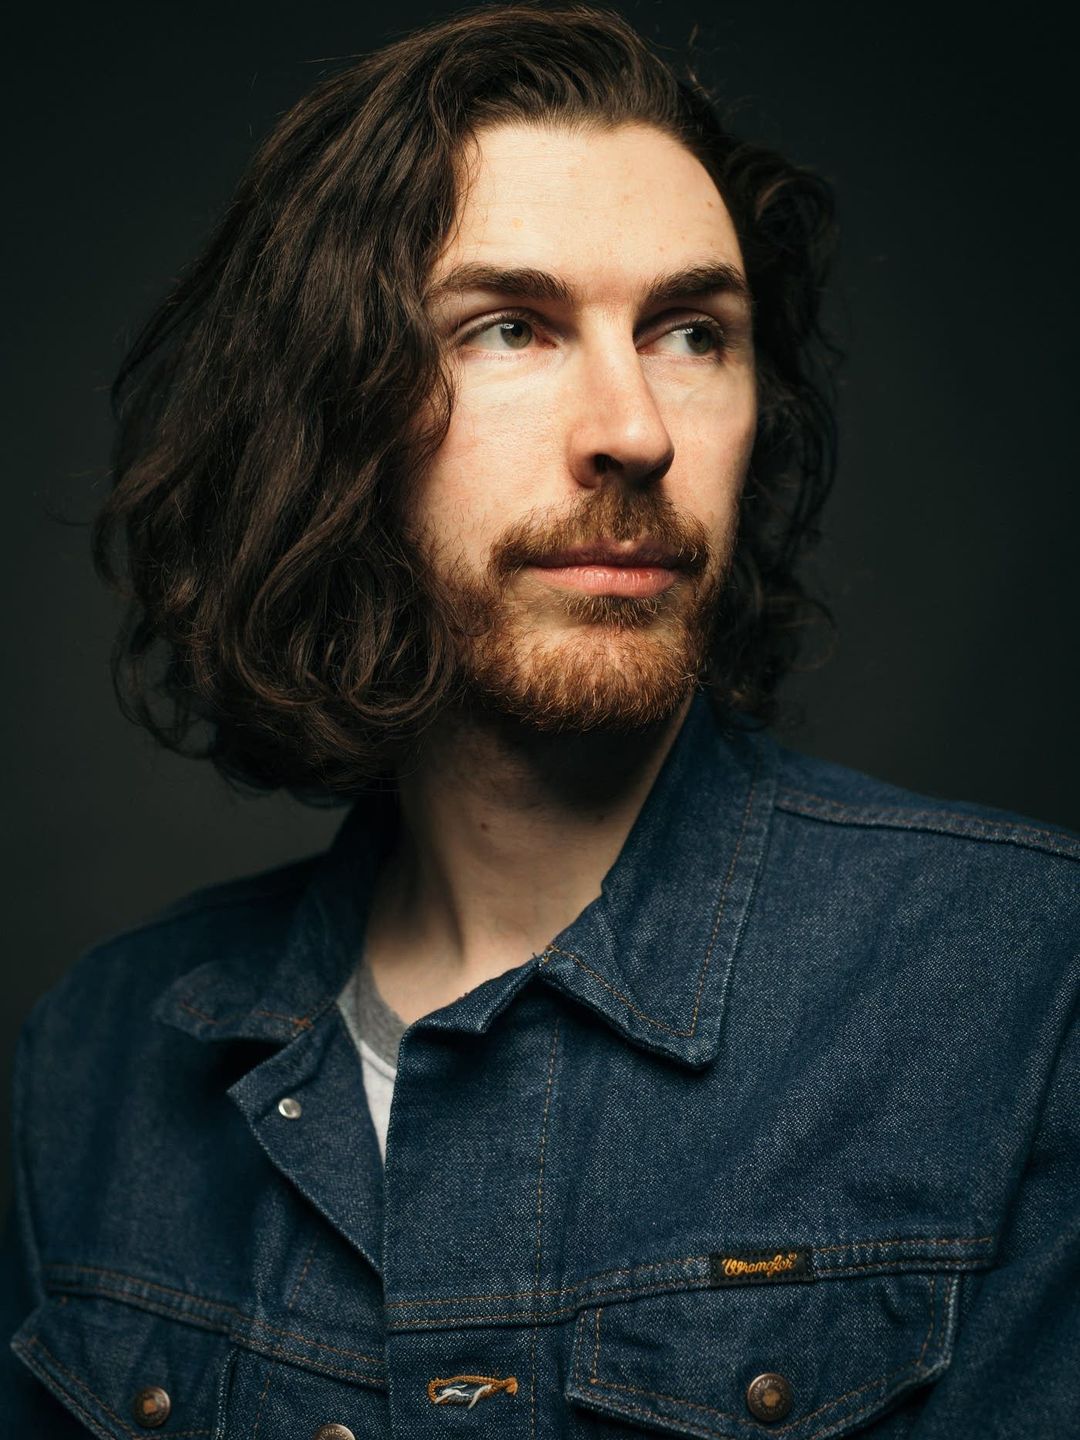 Hozier who are his parents